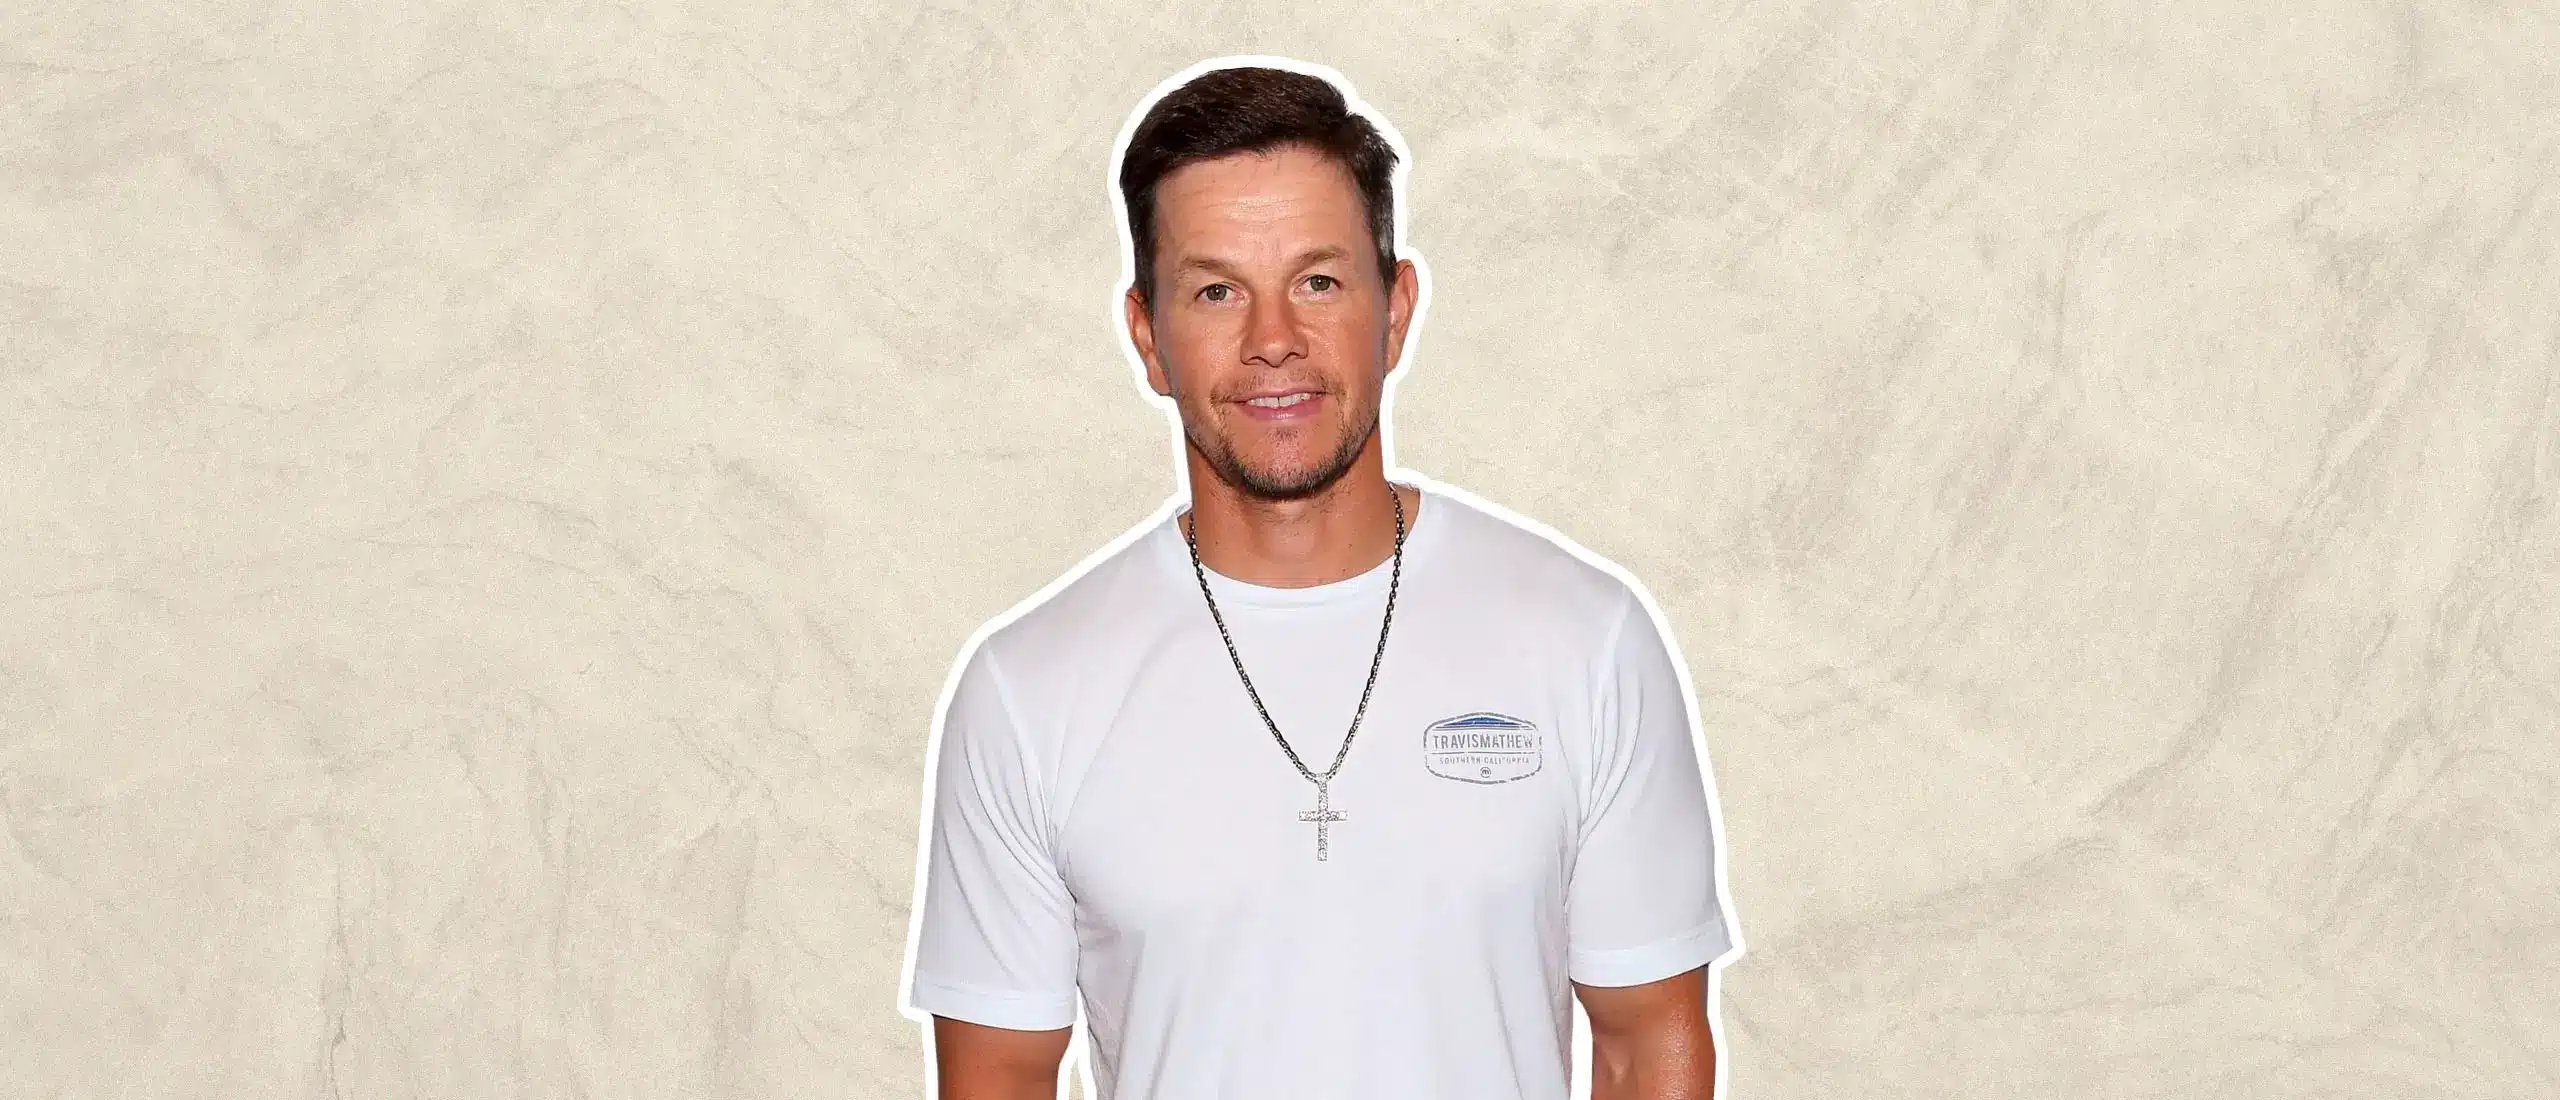 Mark Wahlberg psing in front of textured background